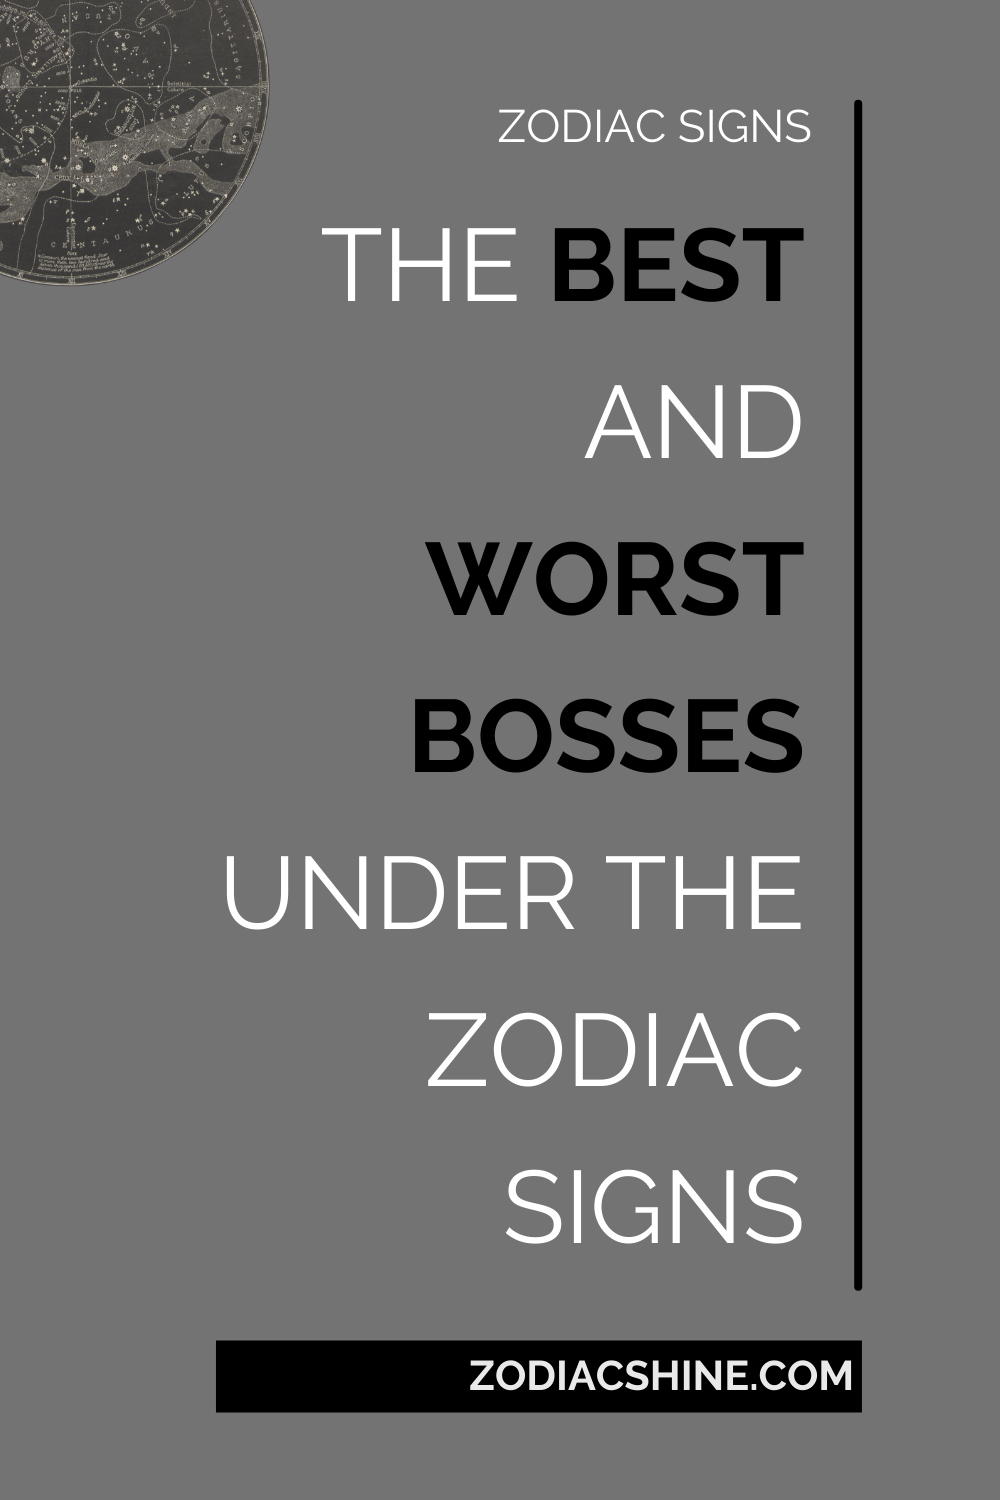 The best and worst bosses under the zodiac signs